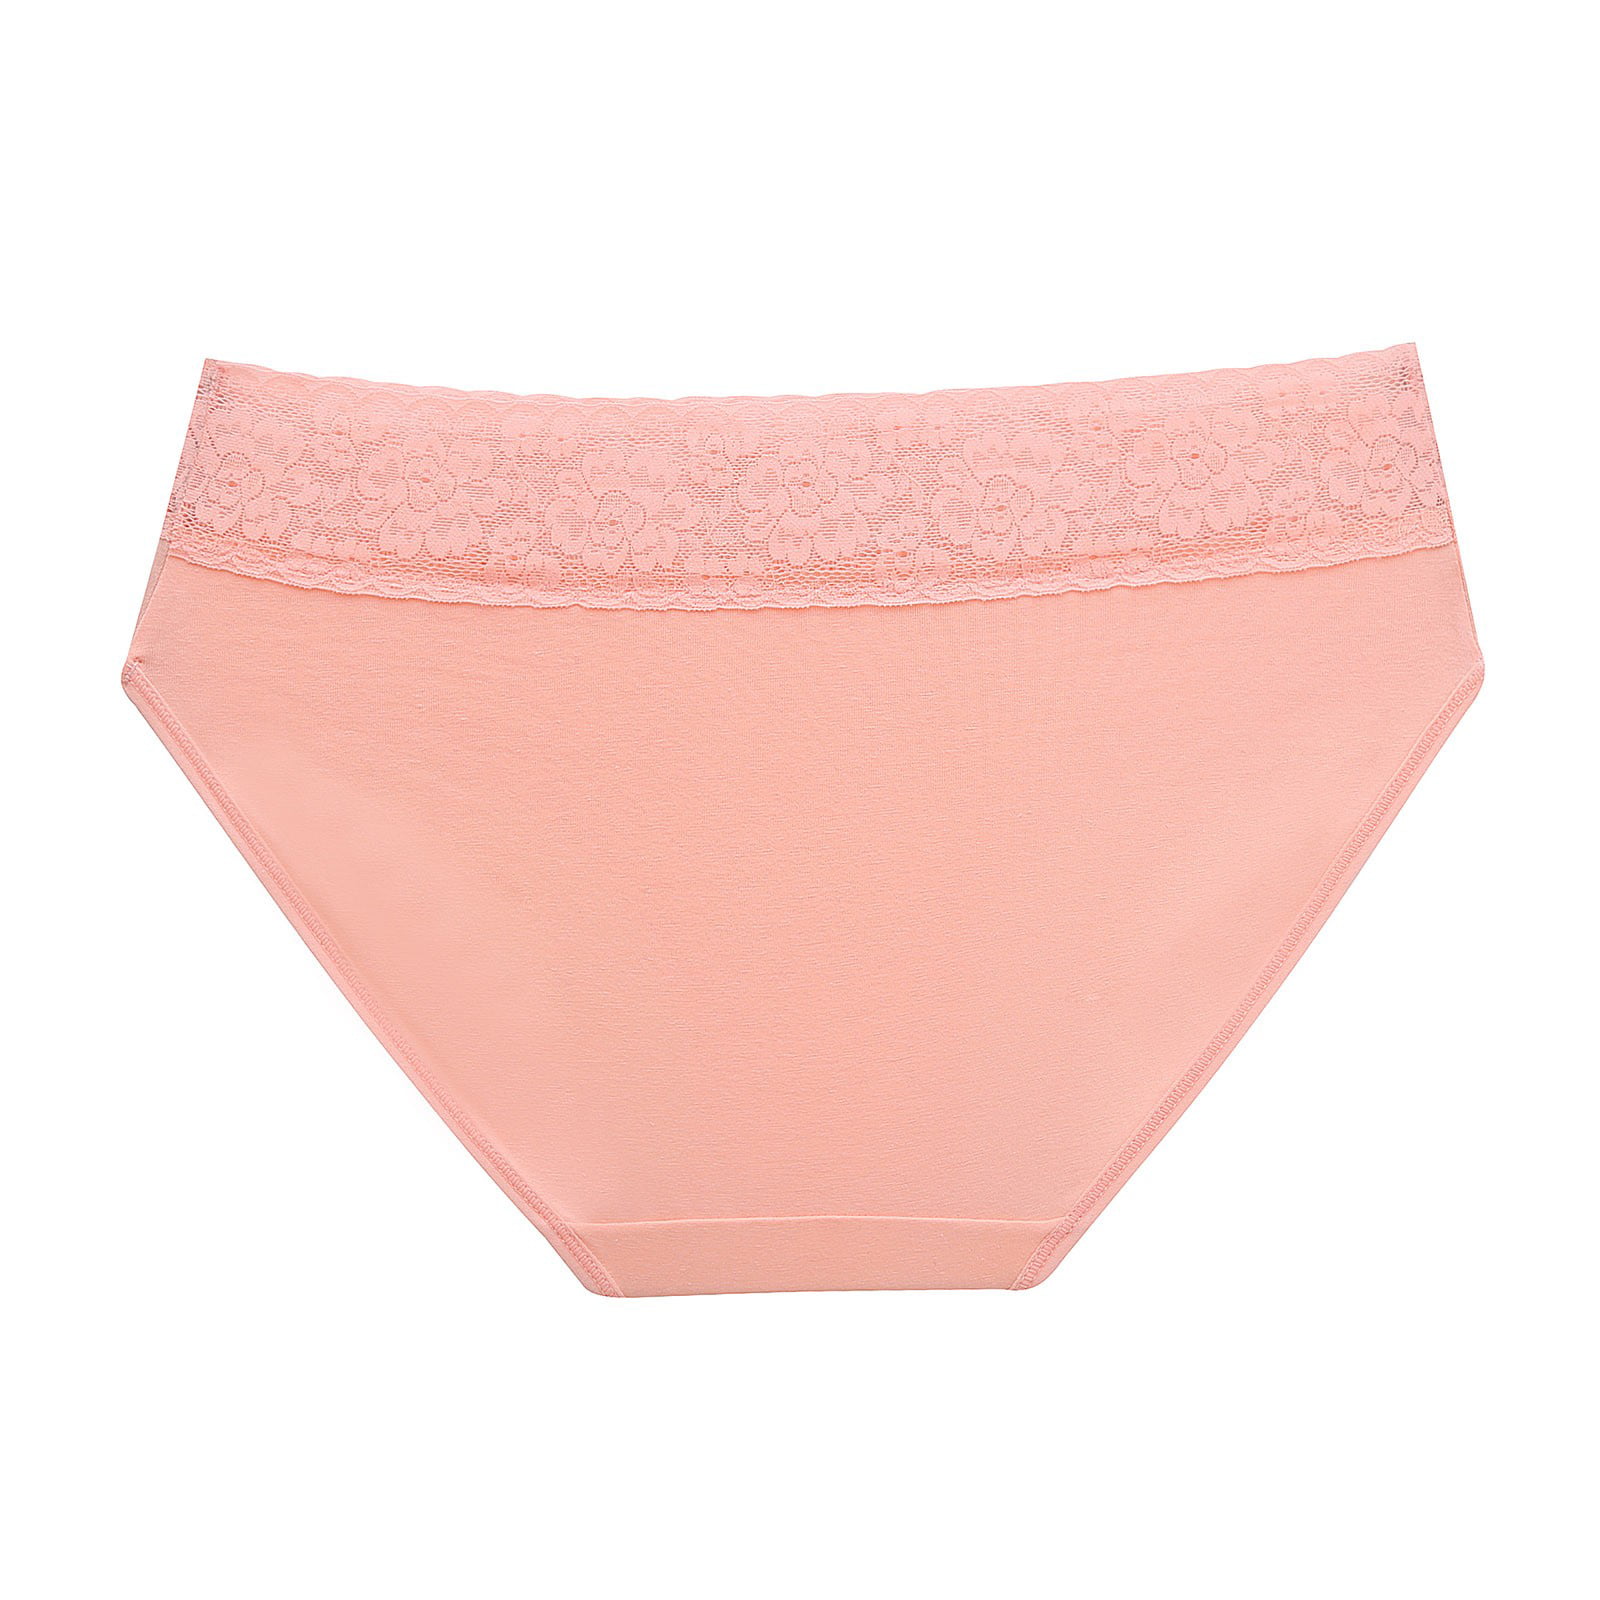 Women's LIVY Panties and underwear from $71